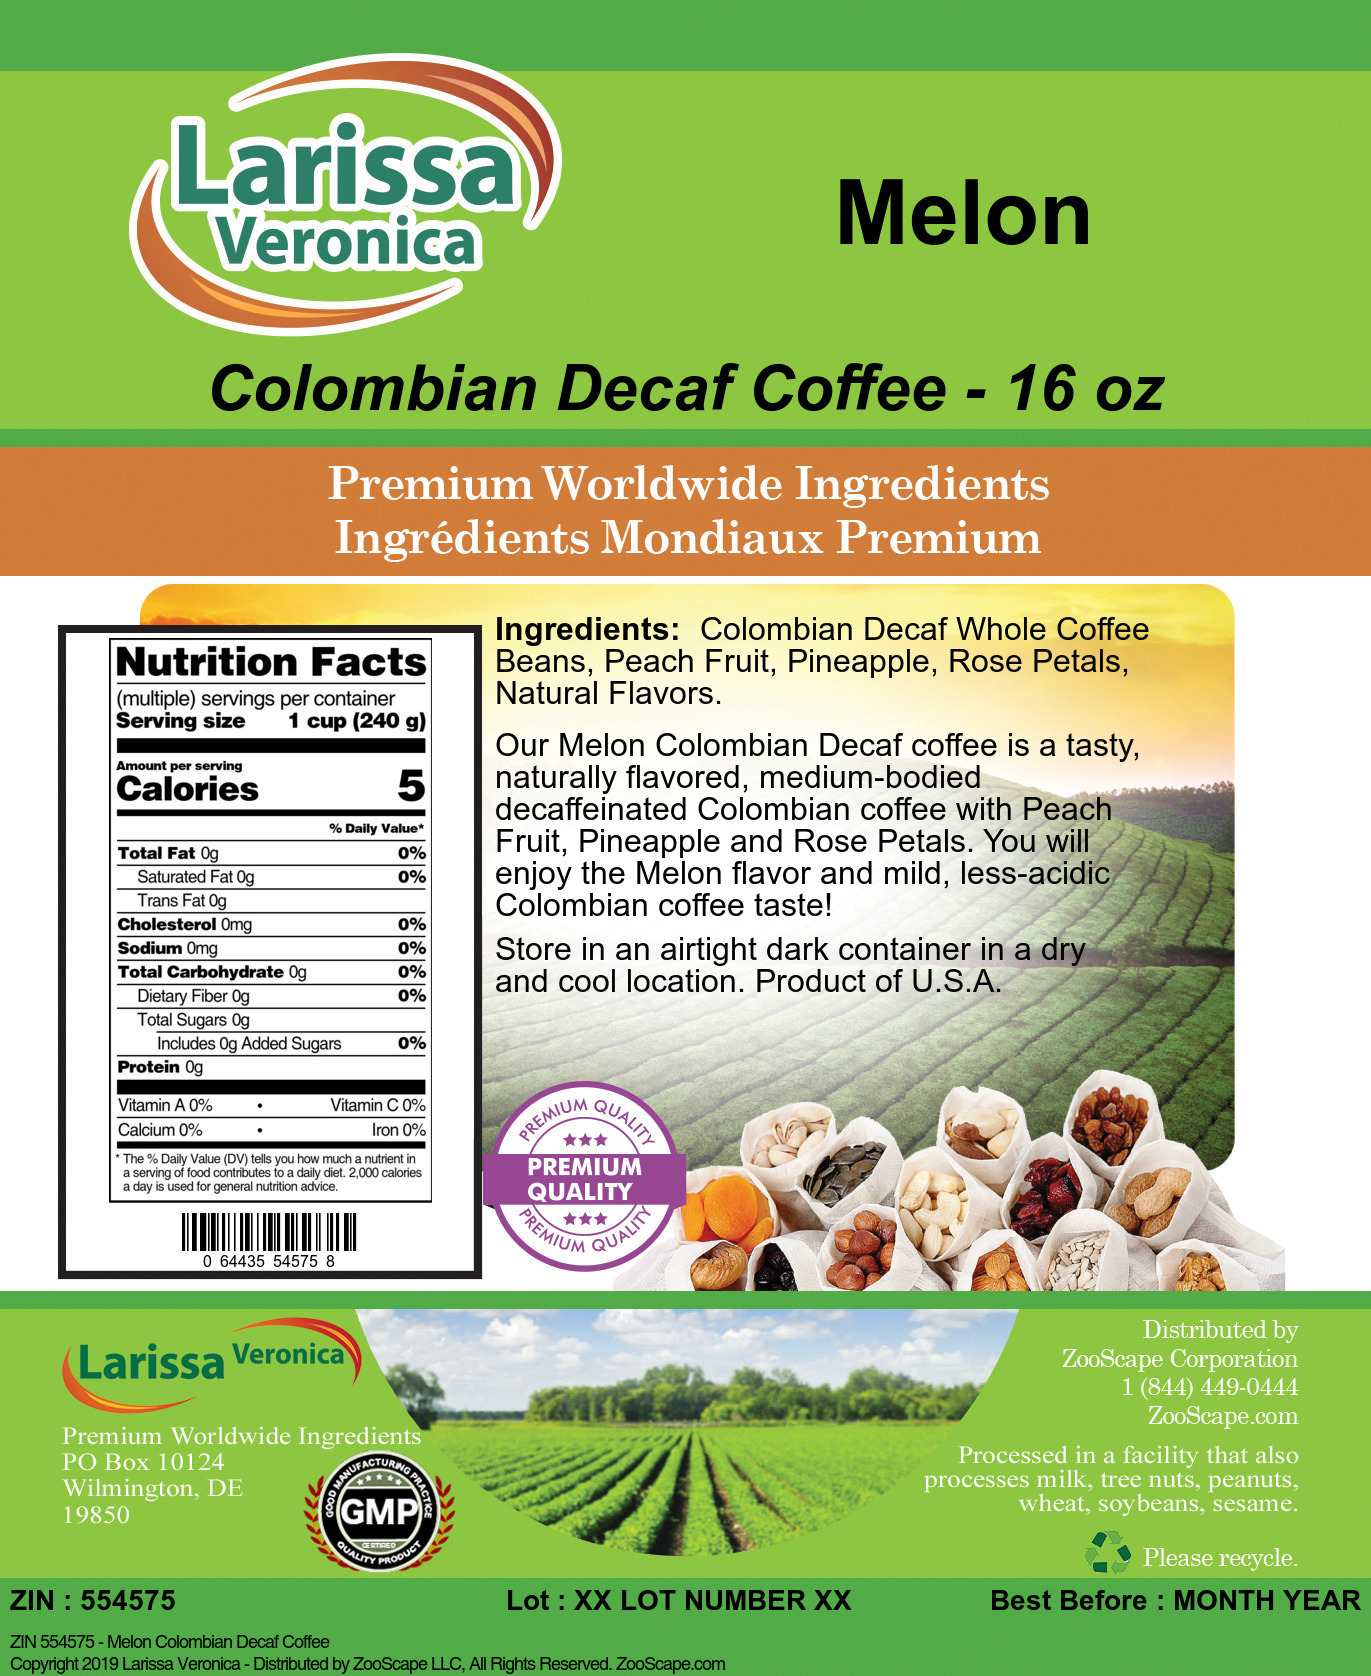 Melon Colombian Decaf Coffee - Label